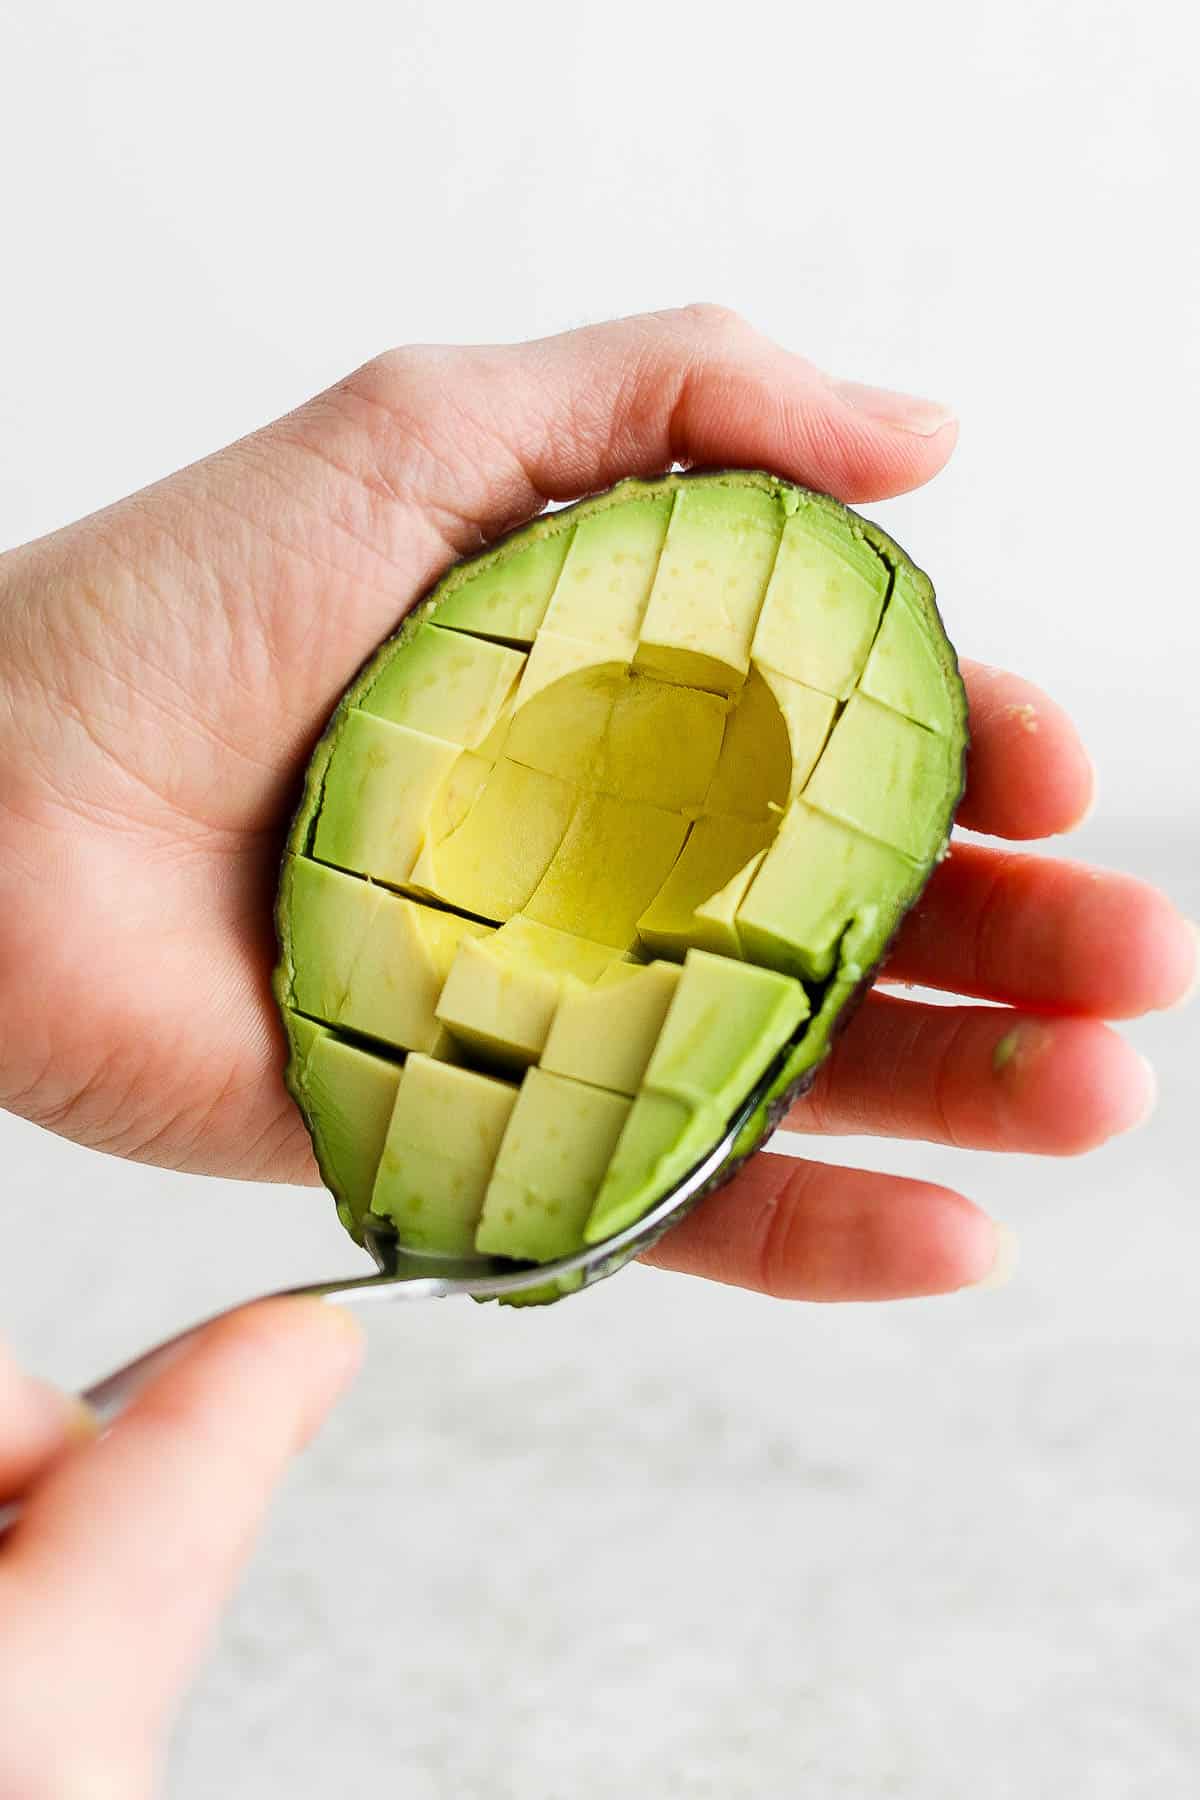 A spoon scooping a diced avocado out of the skin.